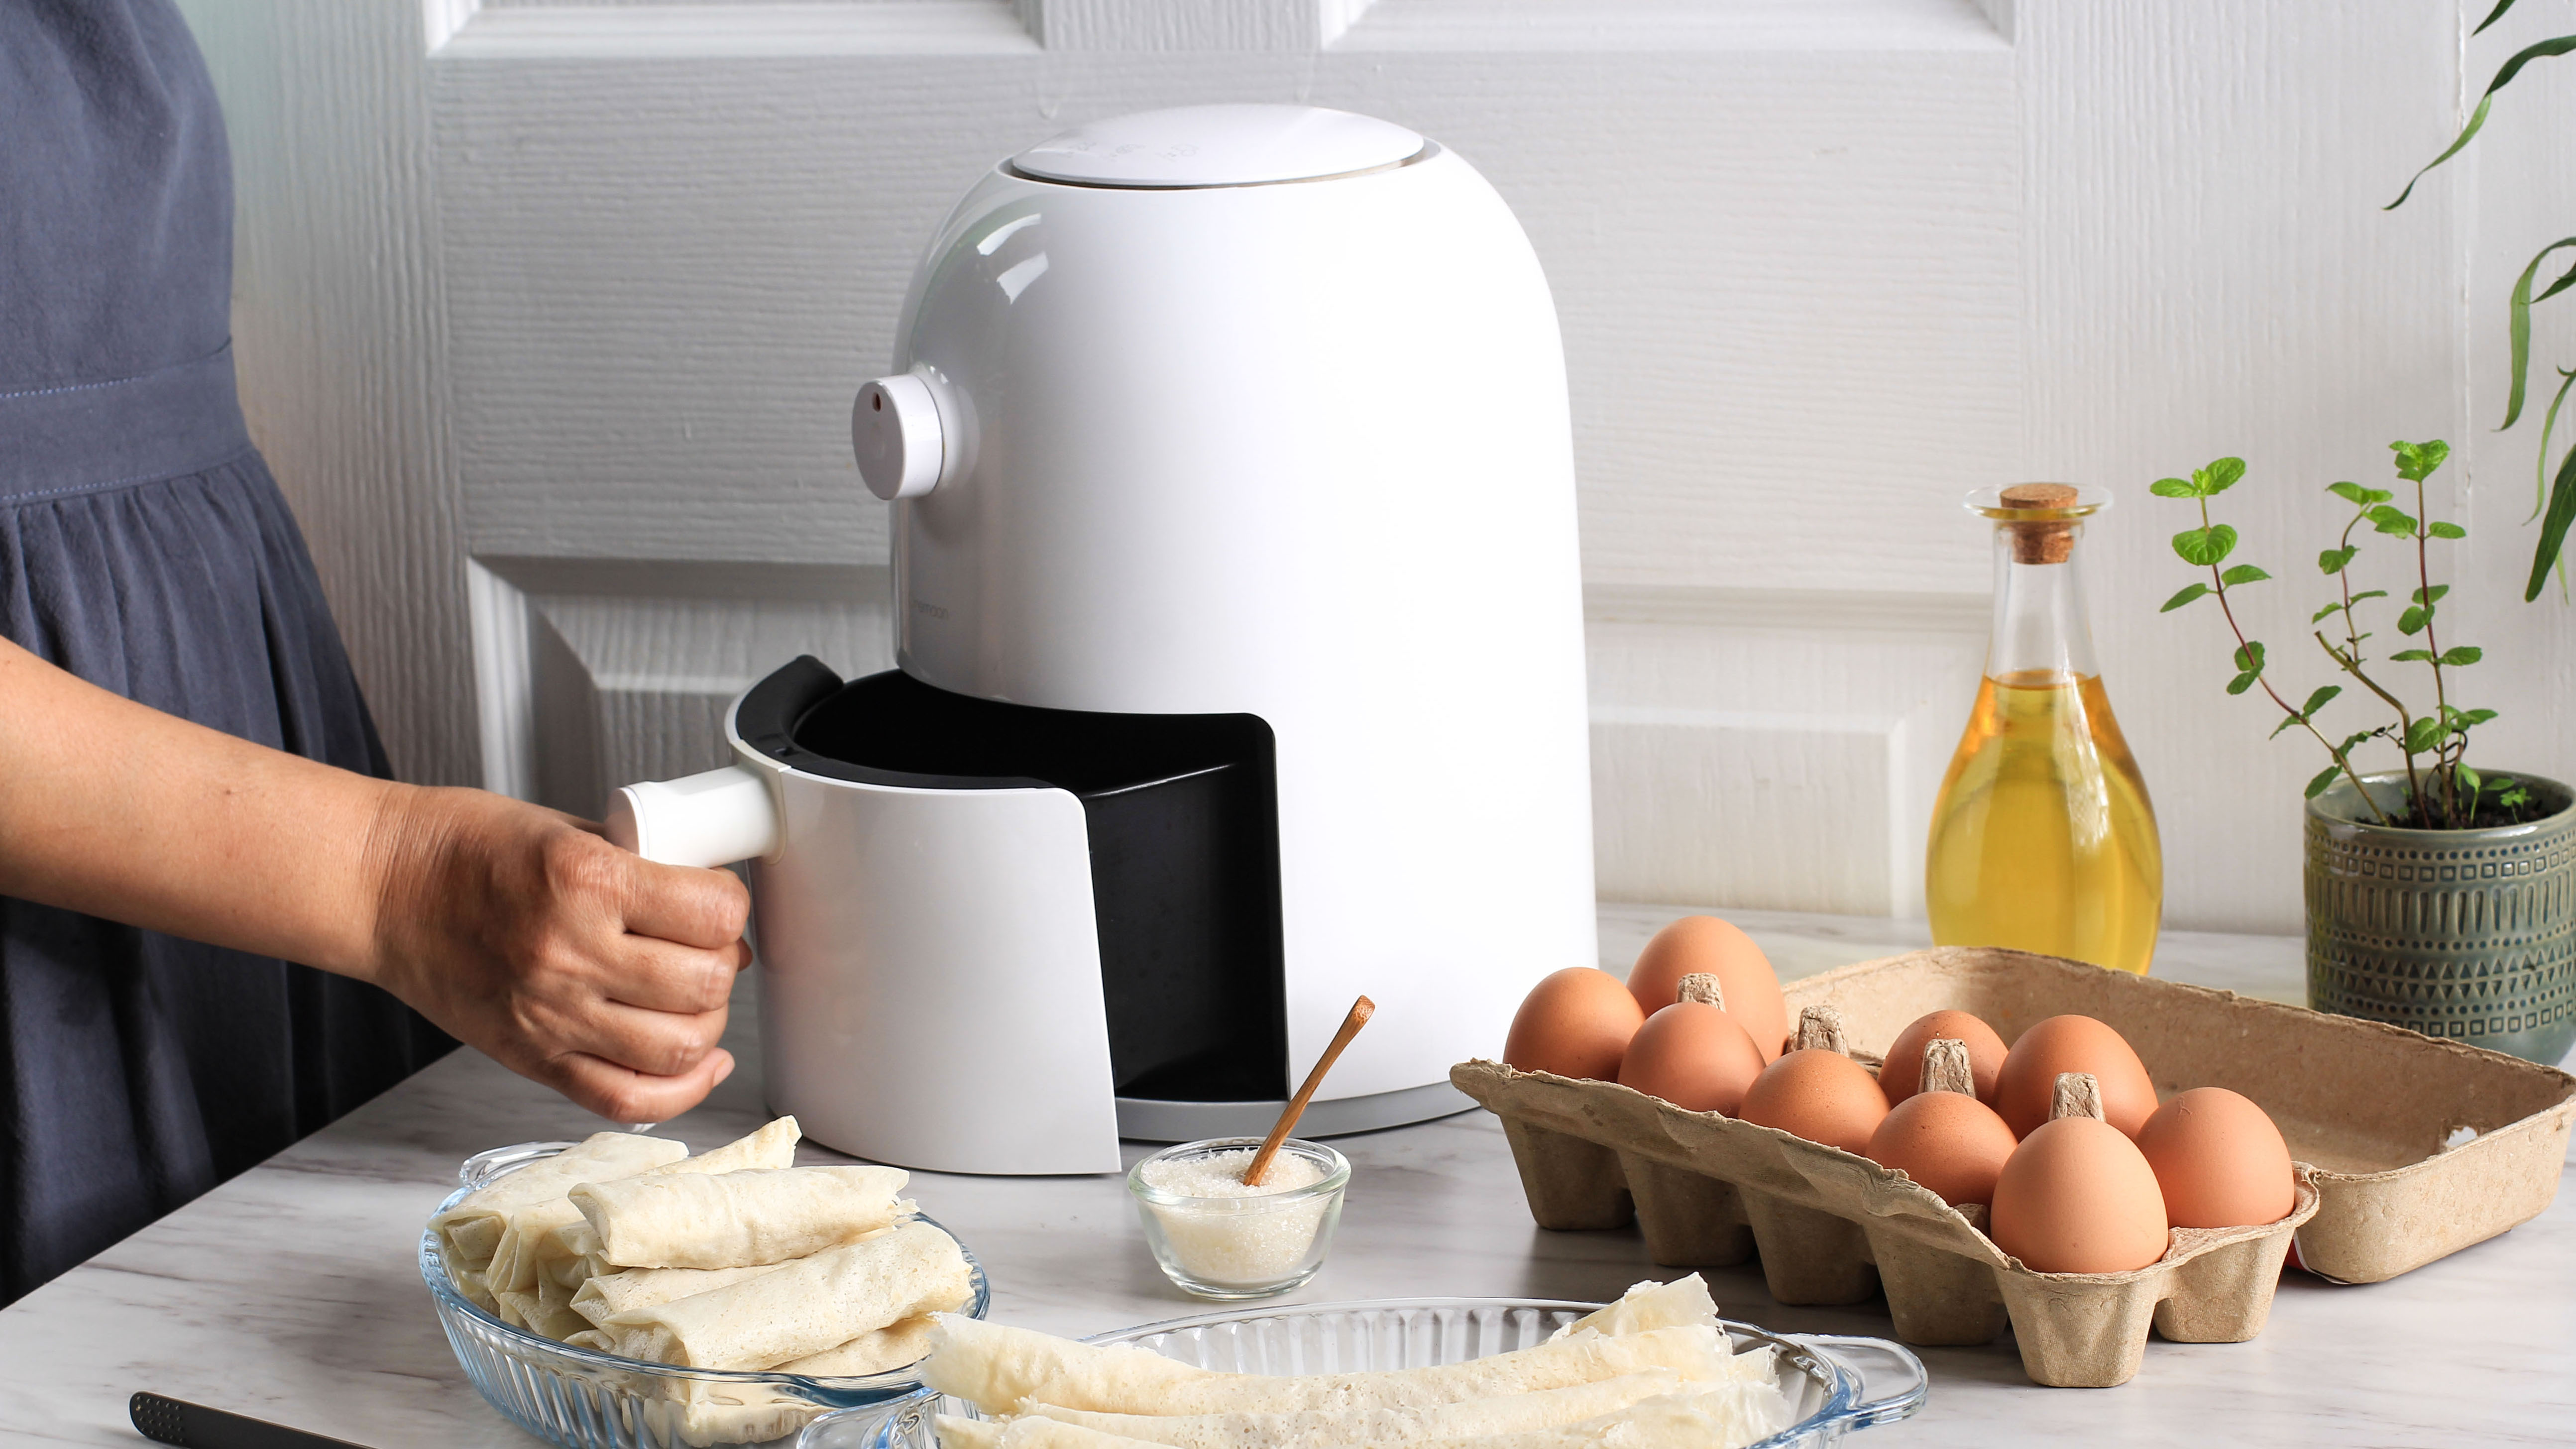 A white air fryer with the basket opened by hand on a table with surrounding ingredients, including eggs and oil